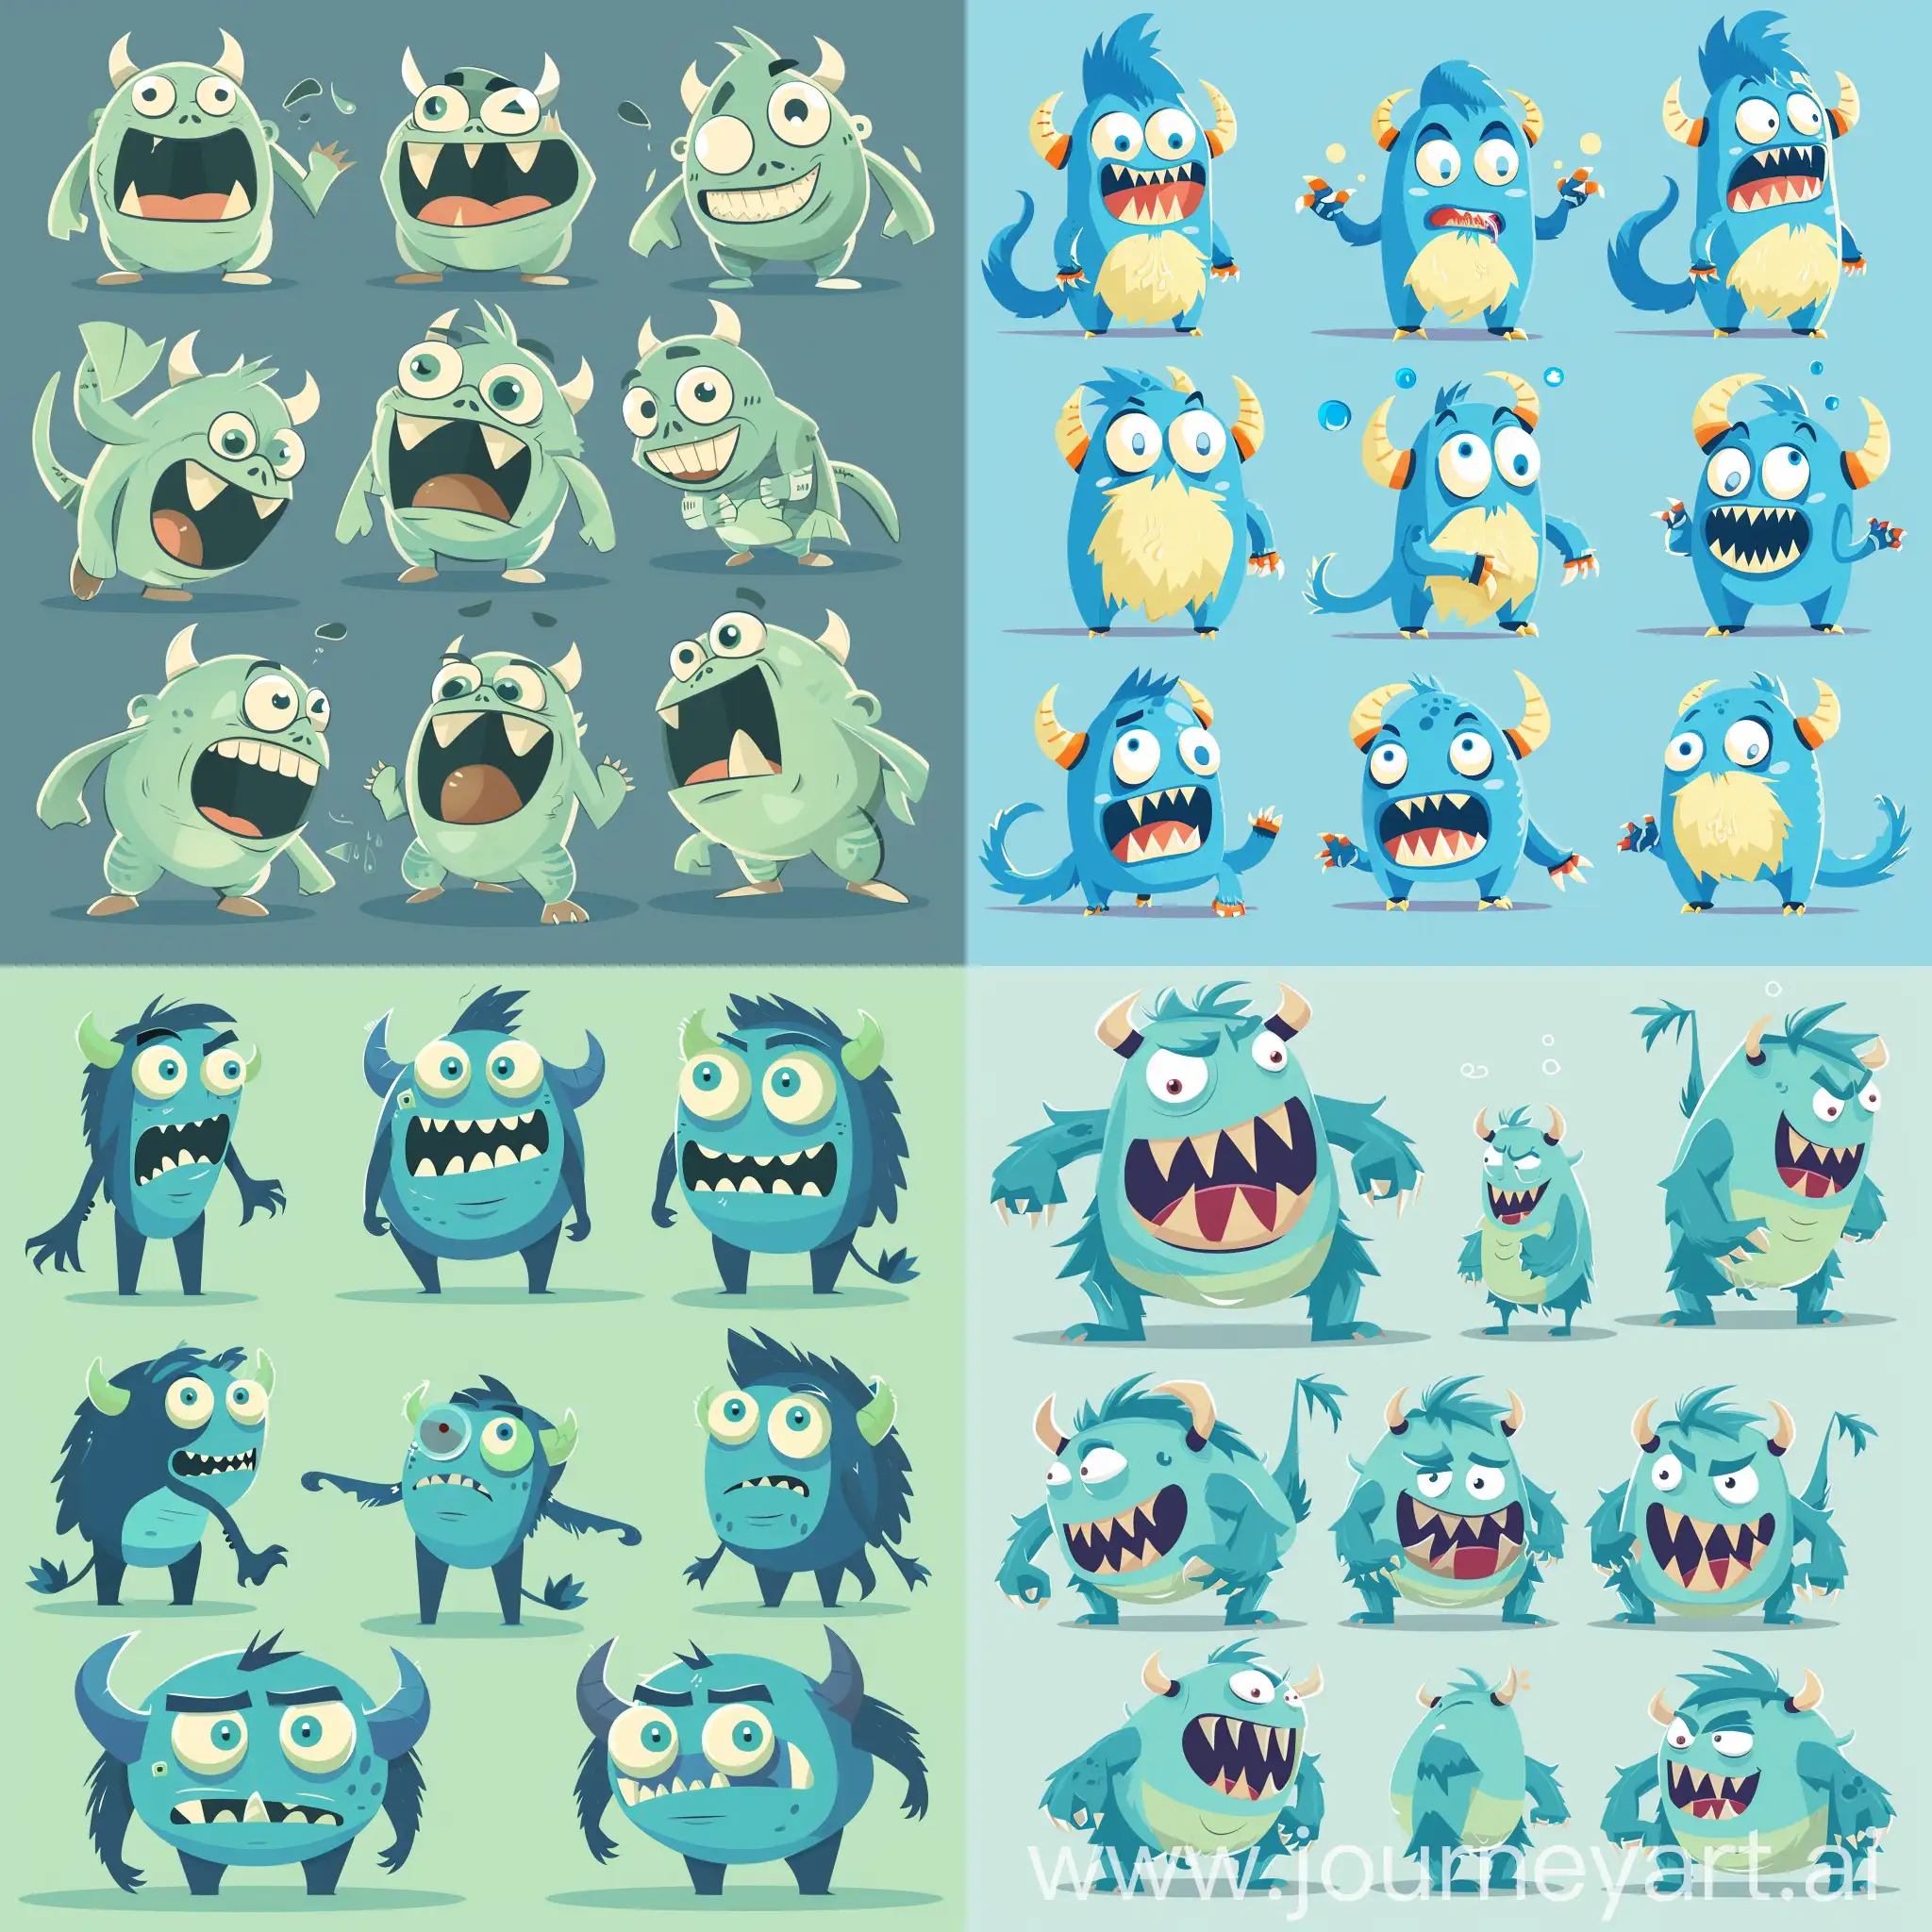 cartoon cute monsters, multiple poses and expressions, in high quality flat style